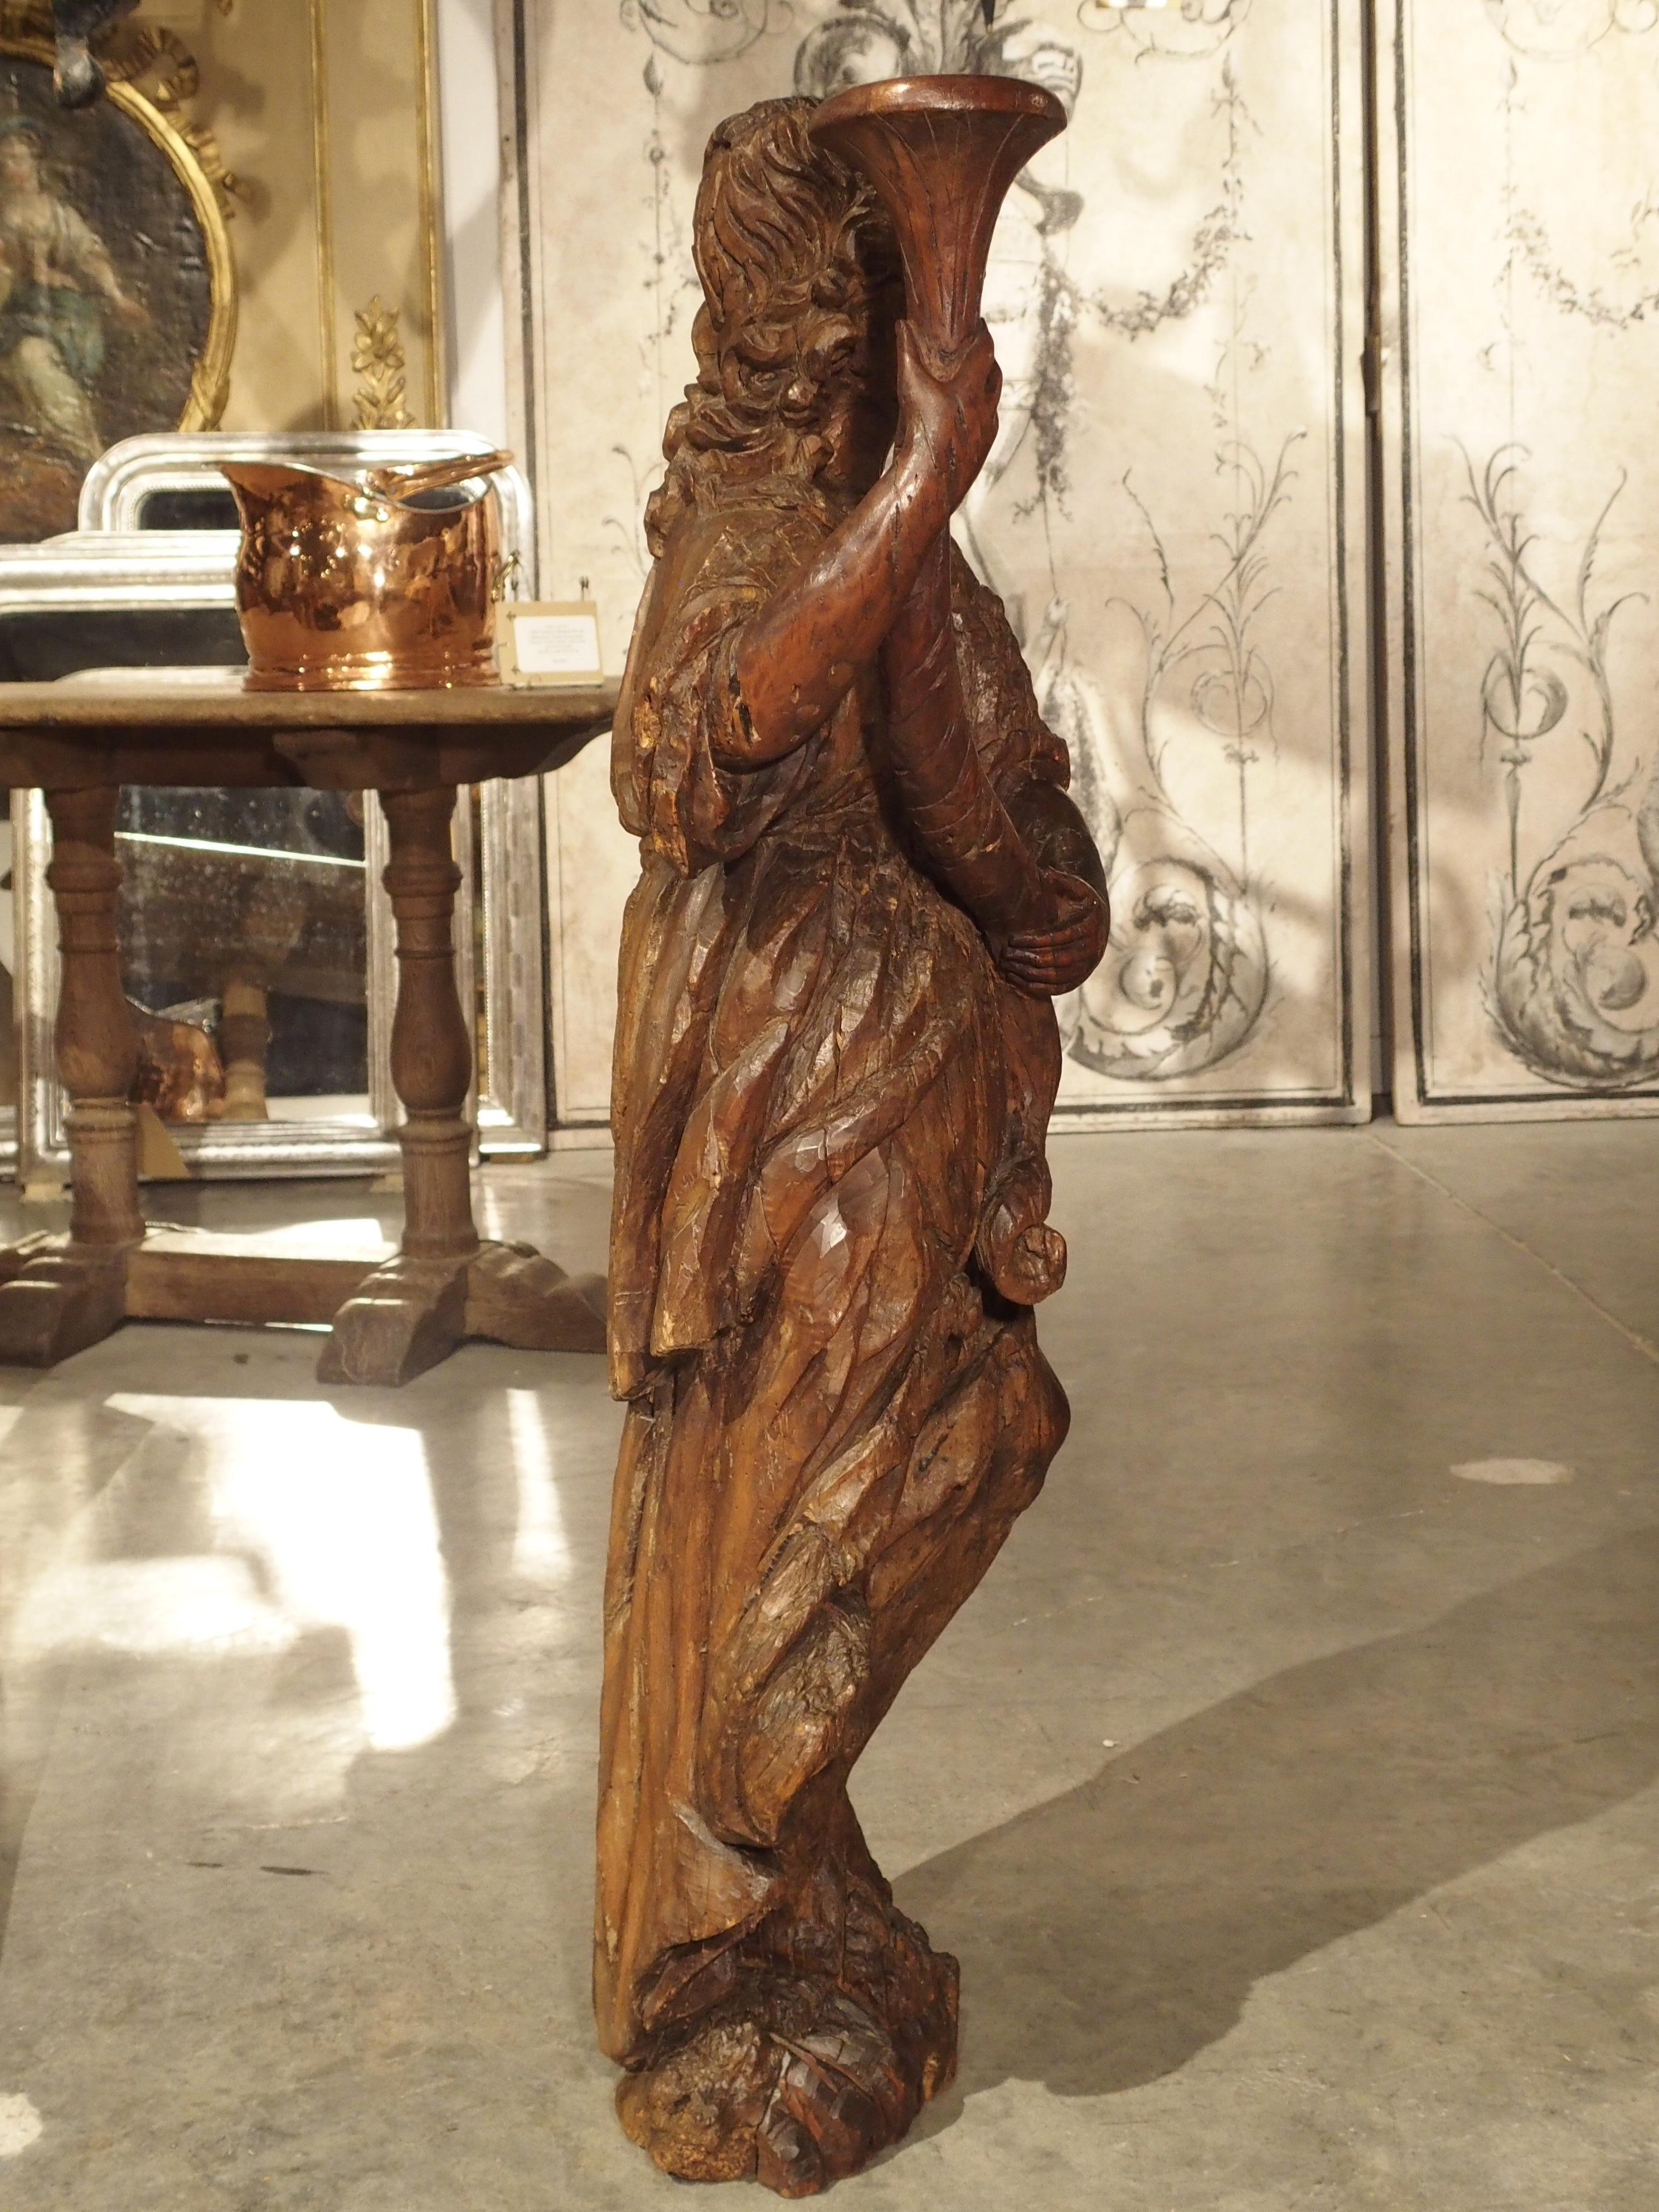 This remarkable carved wooden statue is approximately 380 years old and was carved from Italian Rovere or Durmast wood. This is a variety of European oak known for its tough and heavy nature. The statue depicts a robed figure holding a cornucopia